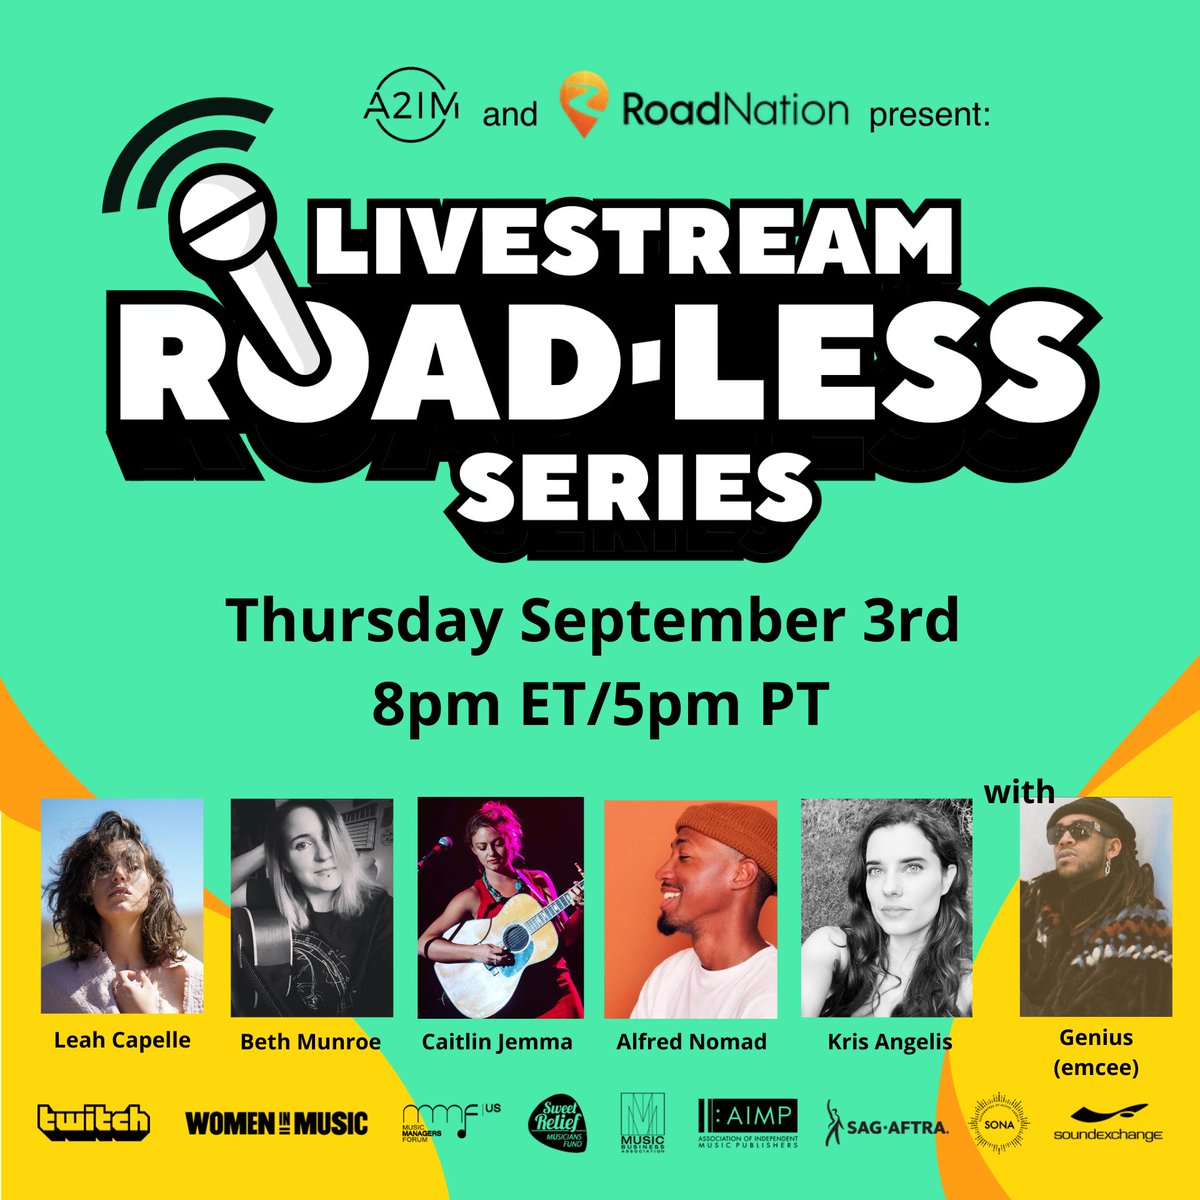 Thanks to @wearetherattle I will be doing a livestream performance for the #RoadlessSeries put on by @a2im & @Road_Nation. Tune in at 8pm EST this Thursday!